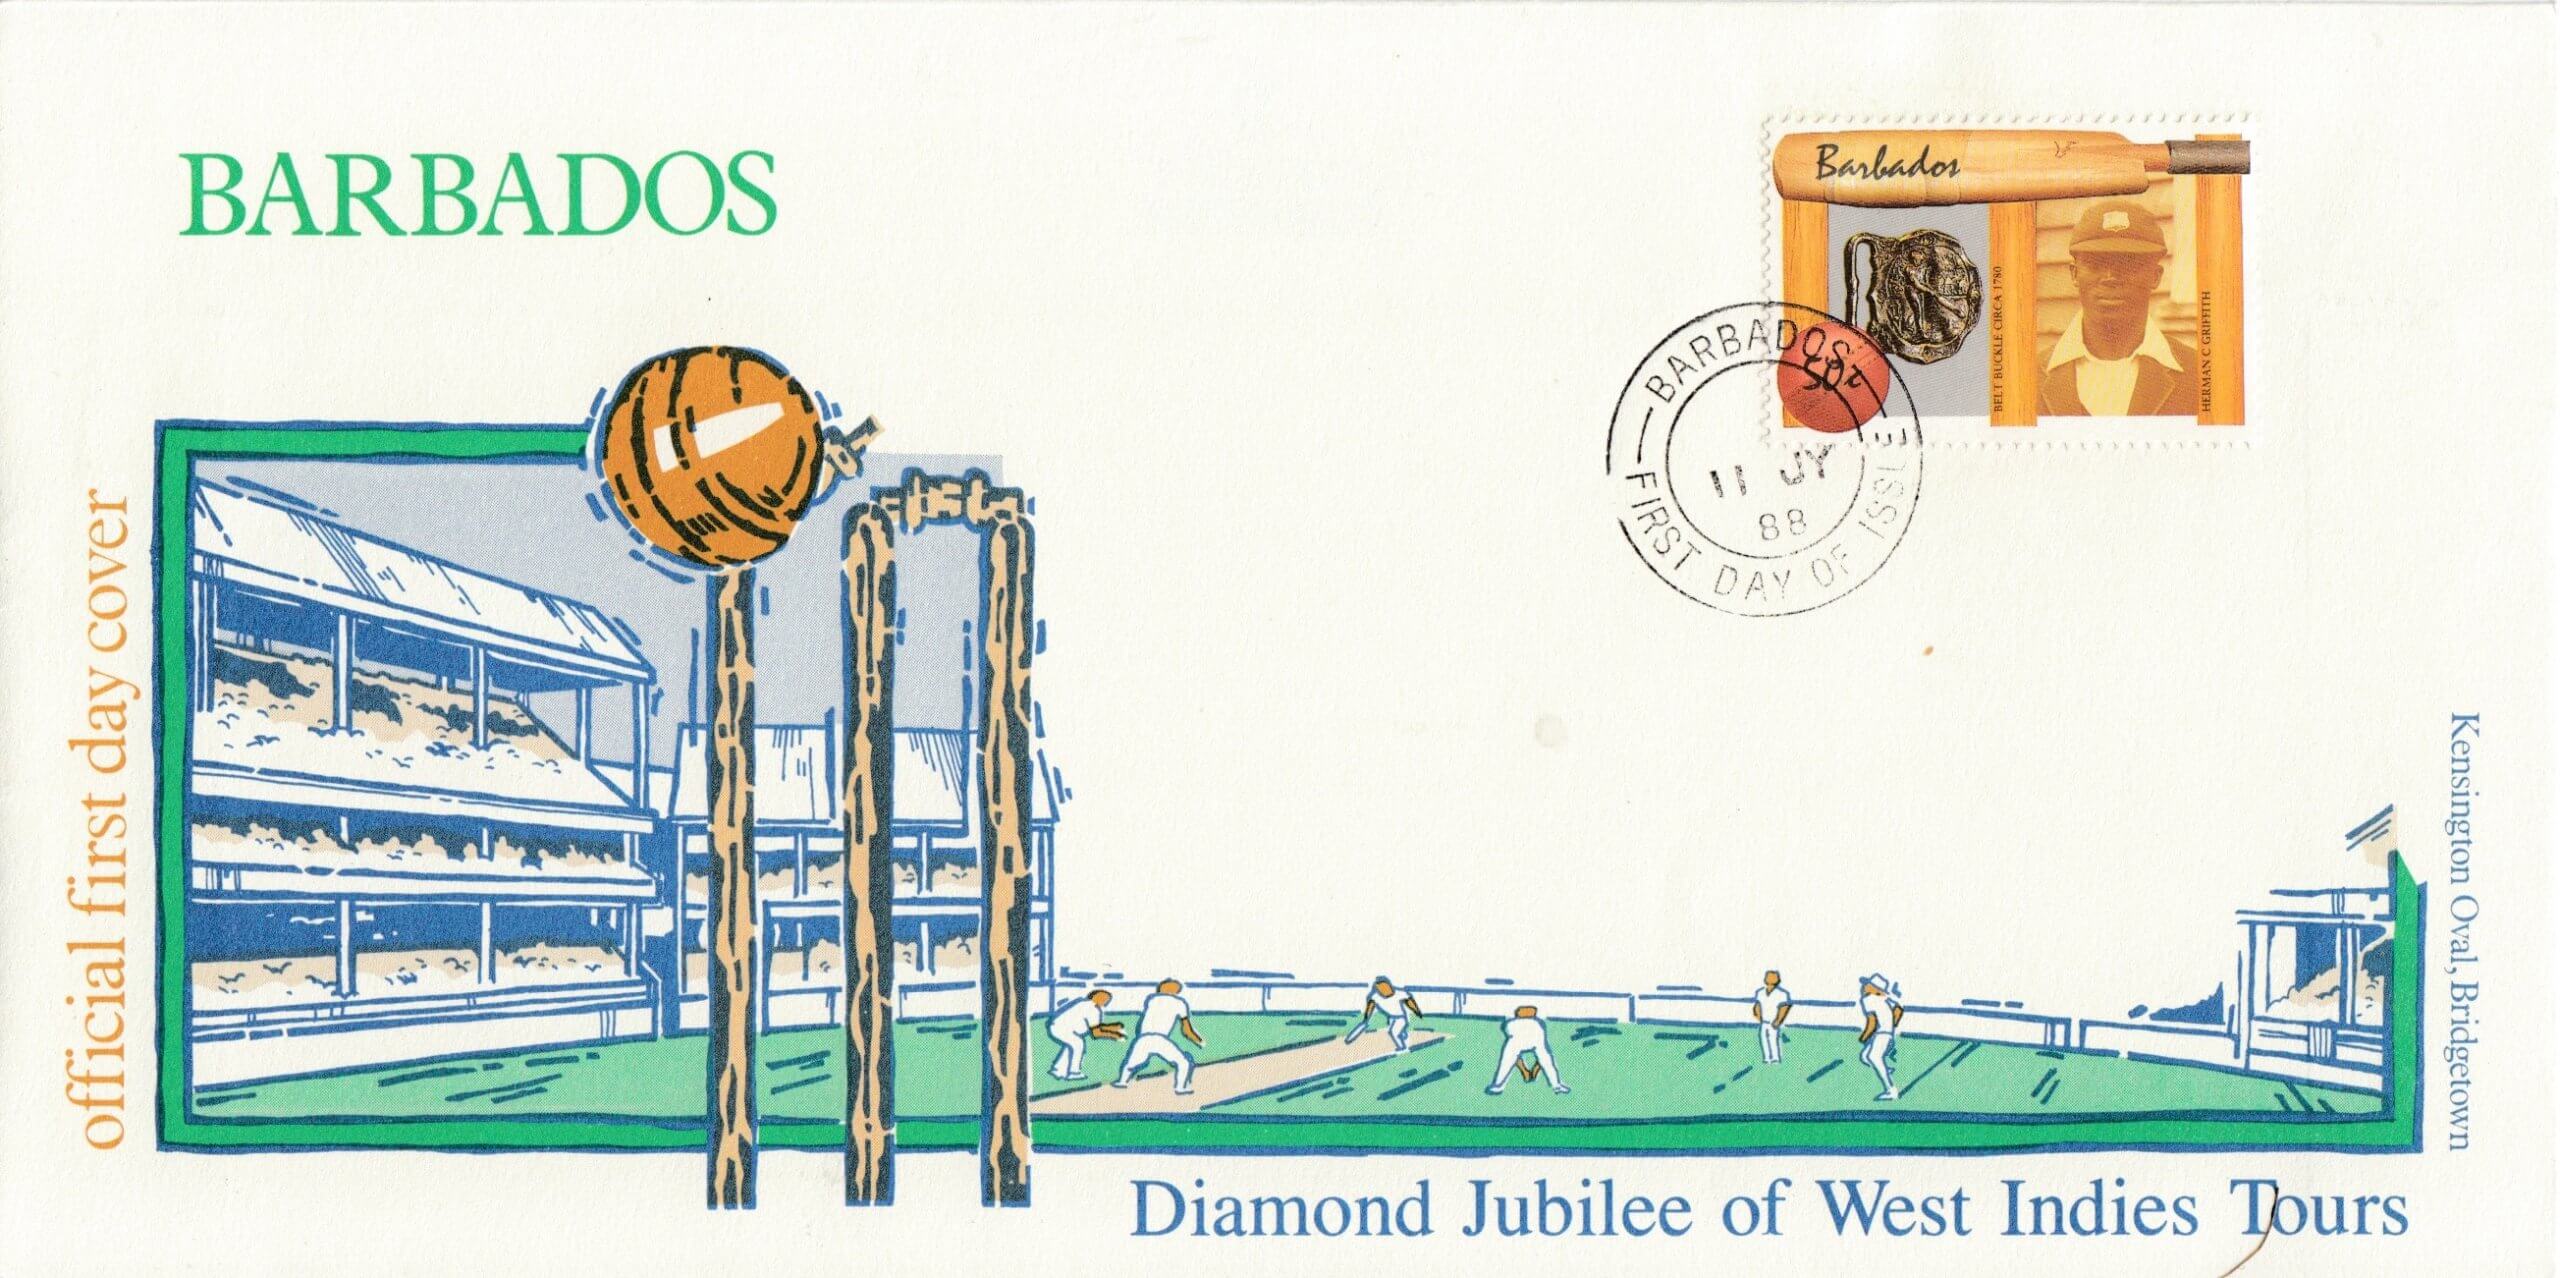 Barbados Cricketers FDC 1988 - 50c value only issued 11th July 1988